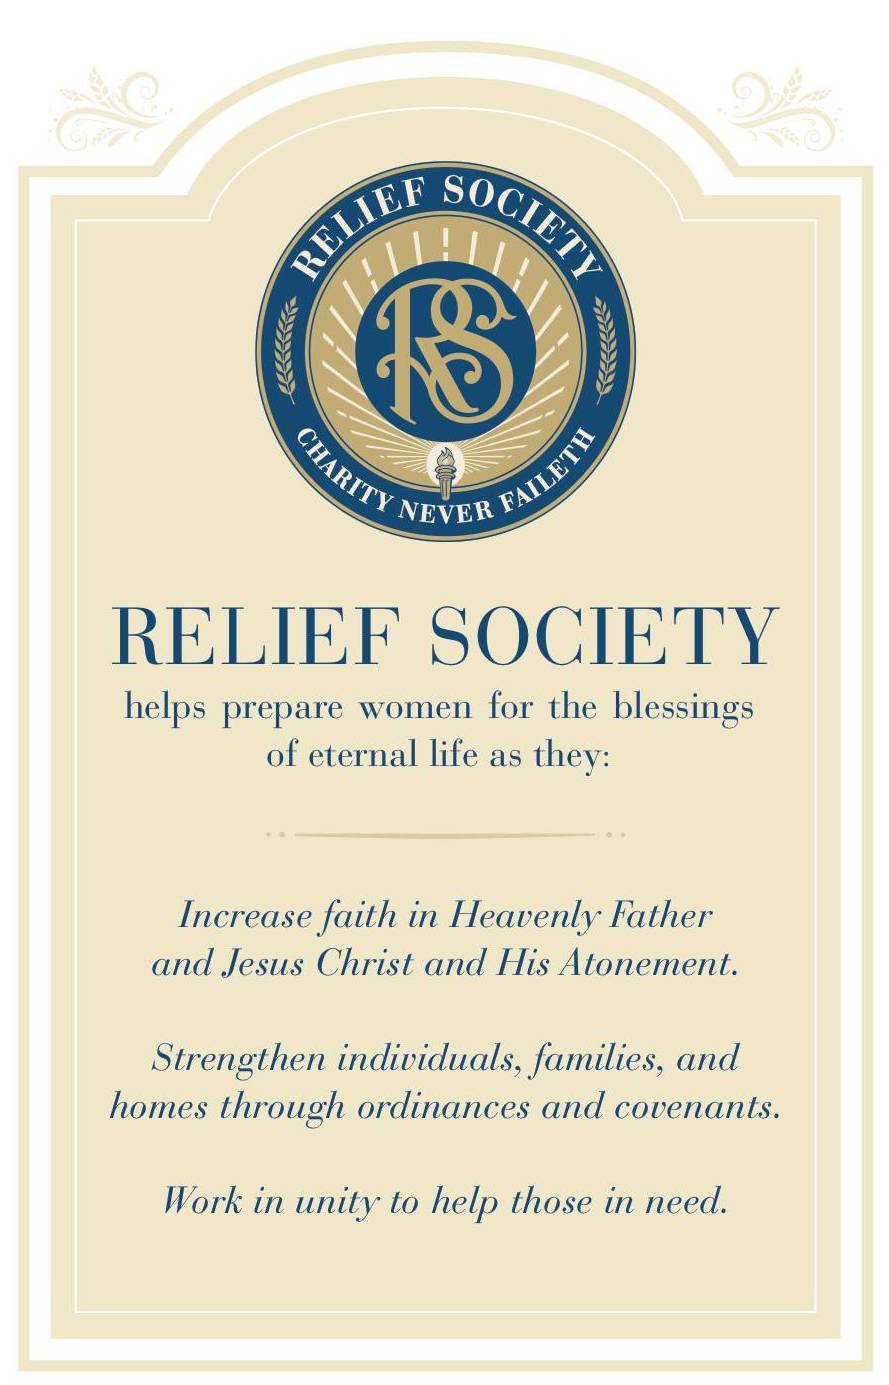 Updates to LDS Relief Society Purpose Statement LDS365 Resources